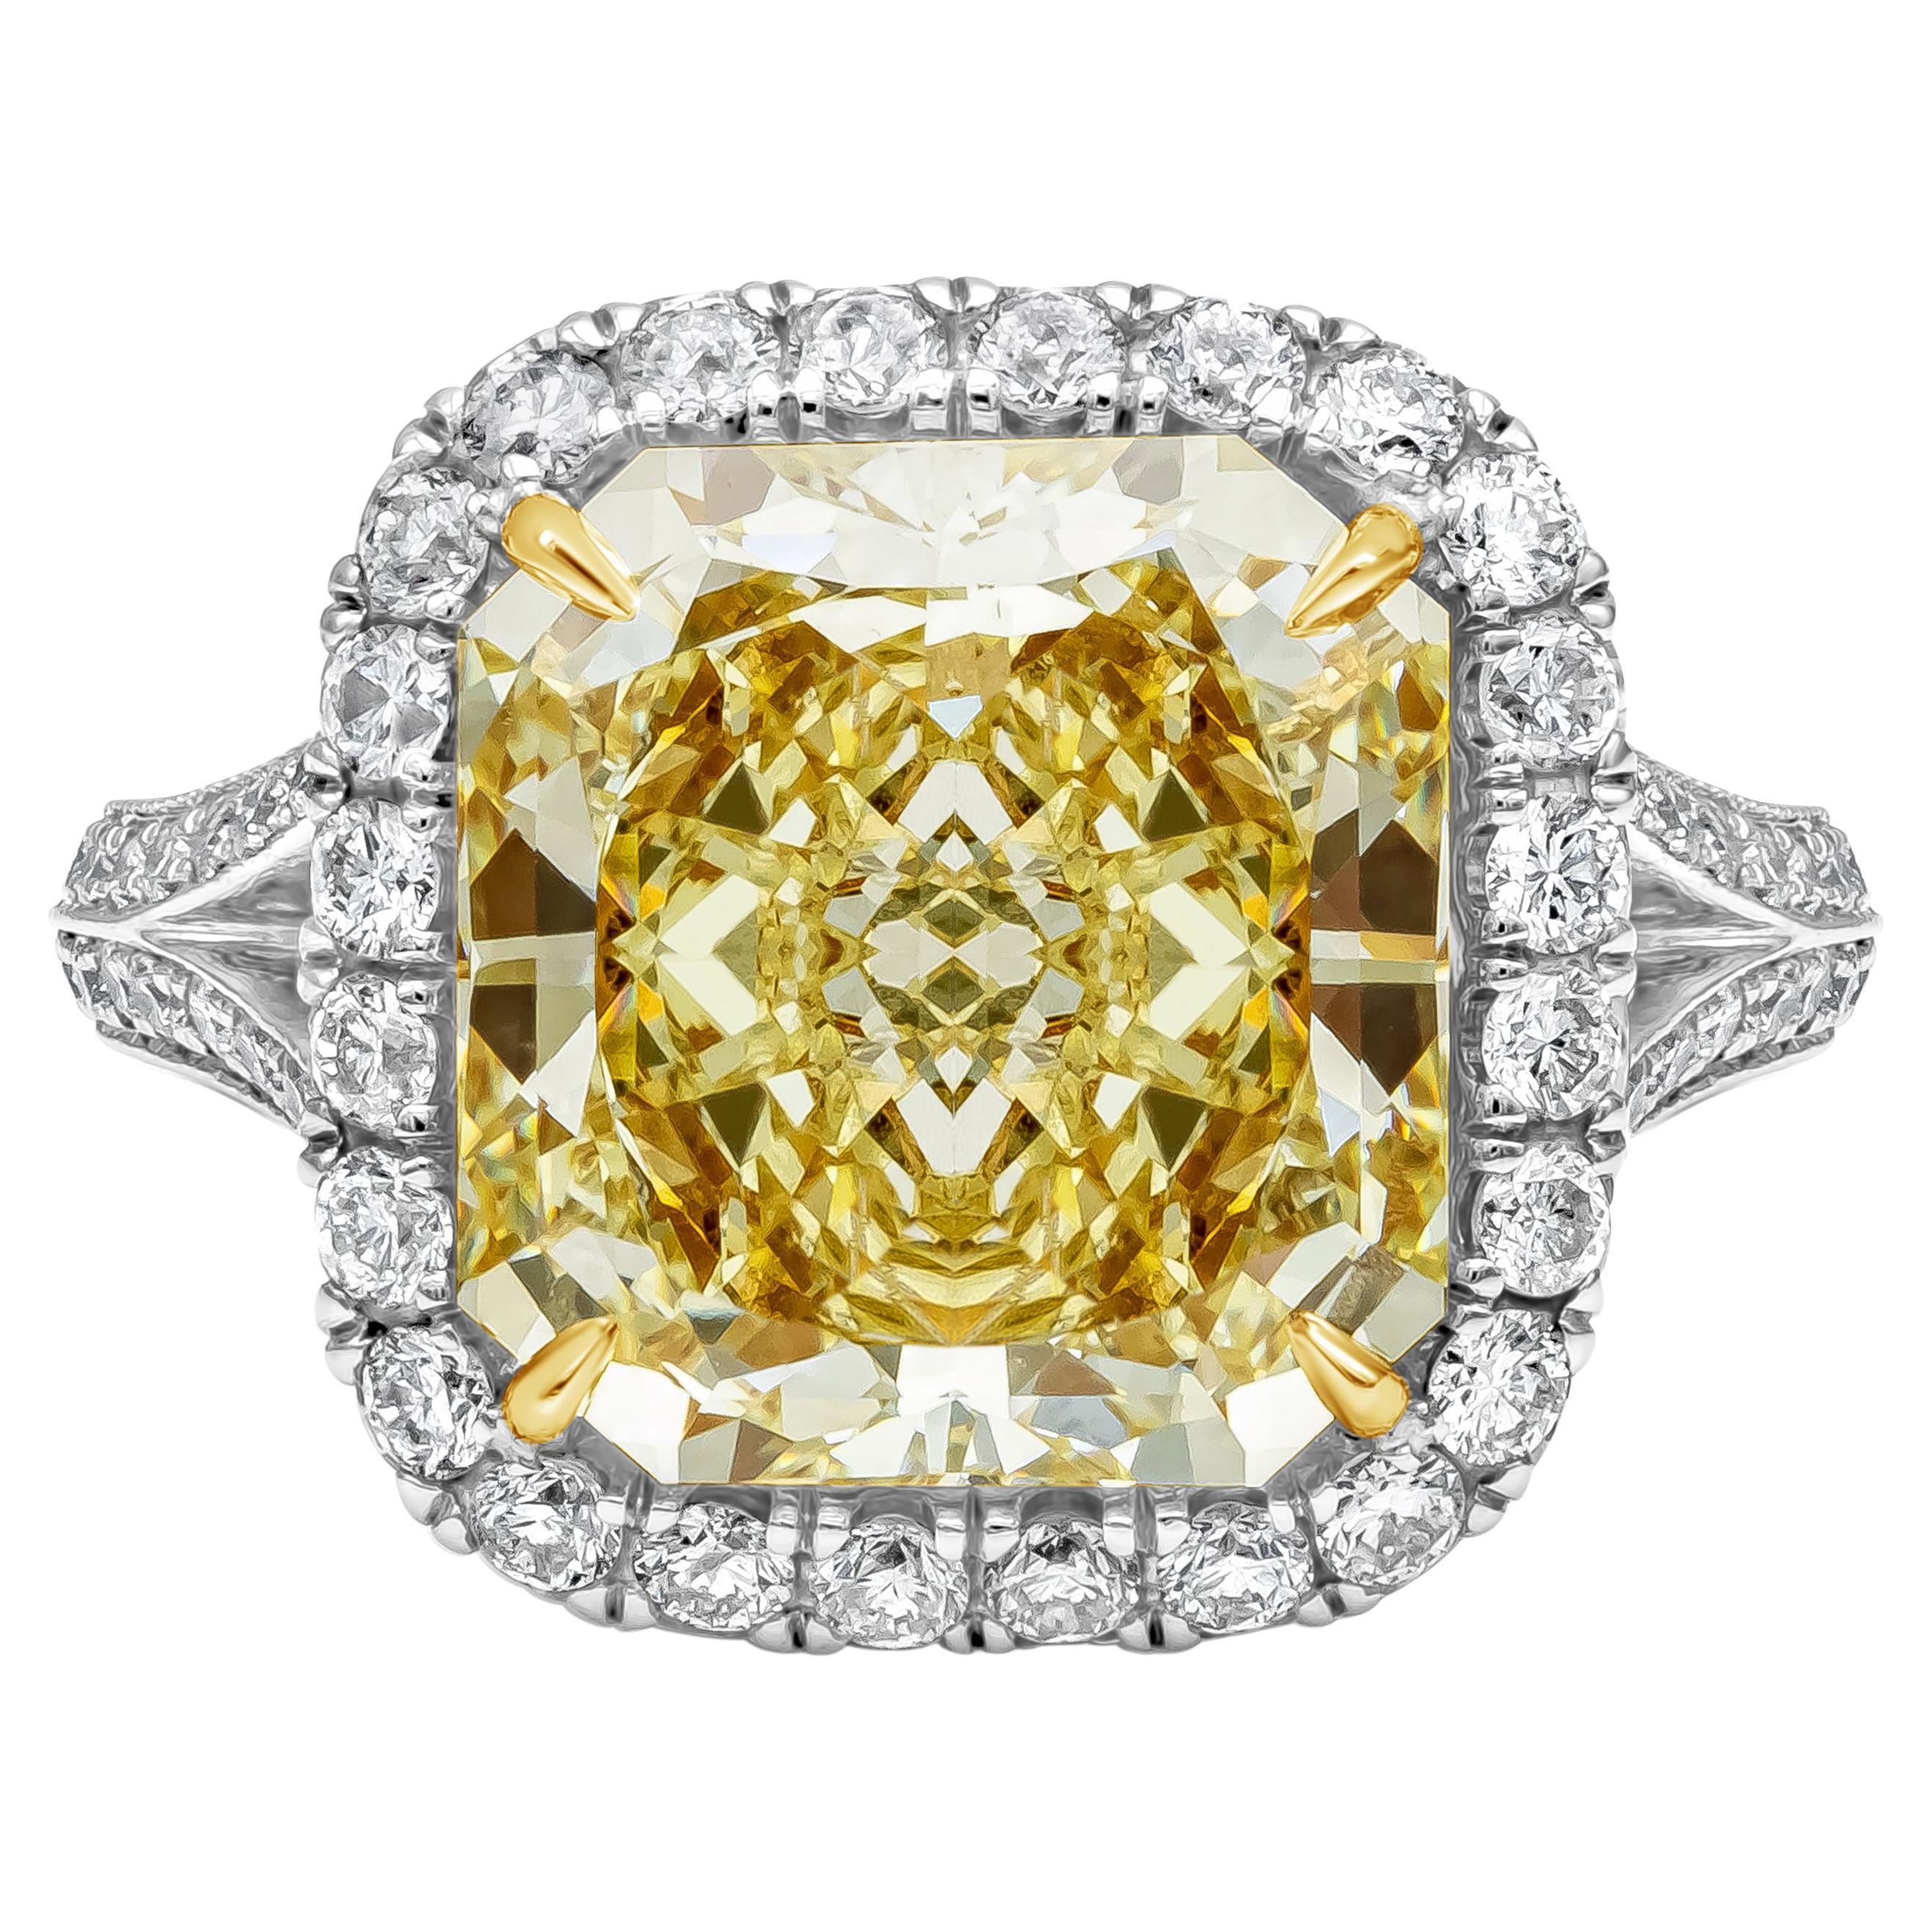 GIA Certified 5.32 Carat Radiant Cut Fancy Yellow Diamond Halo Engagement Ring